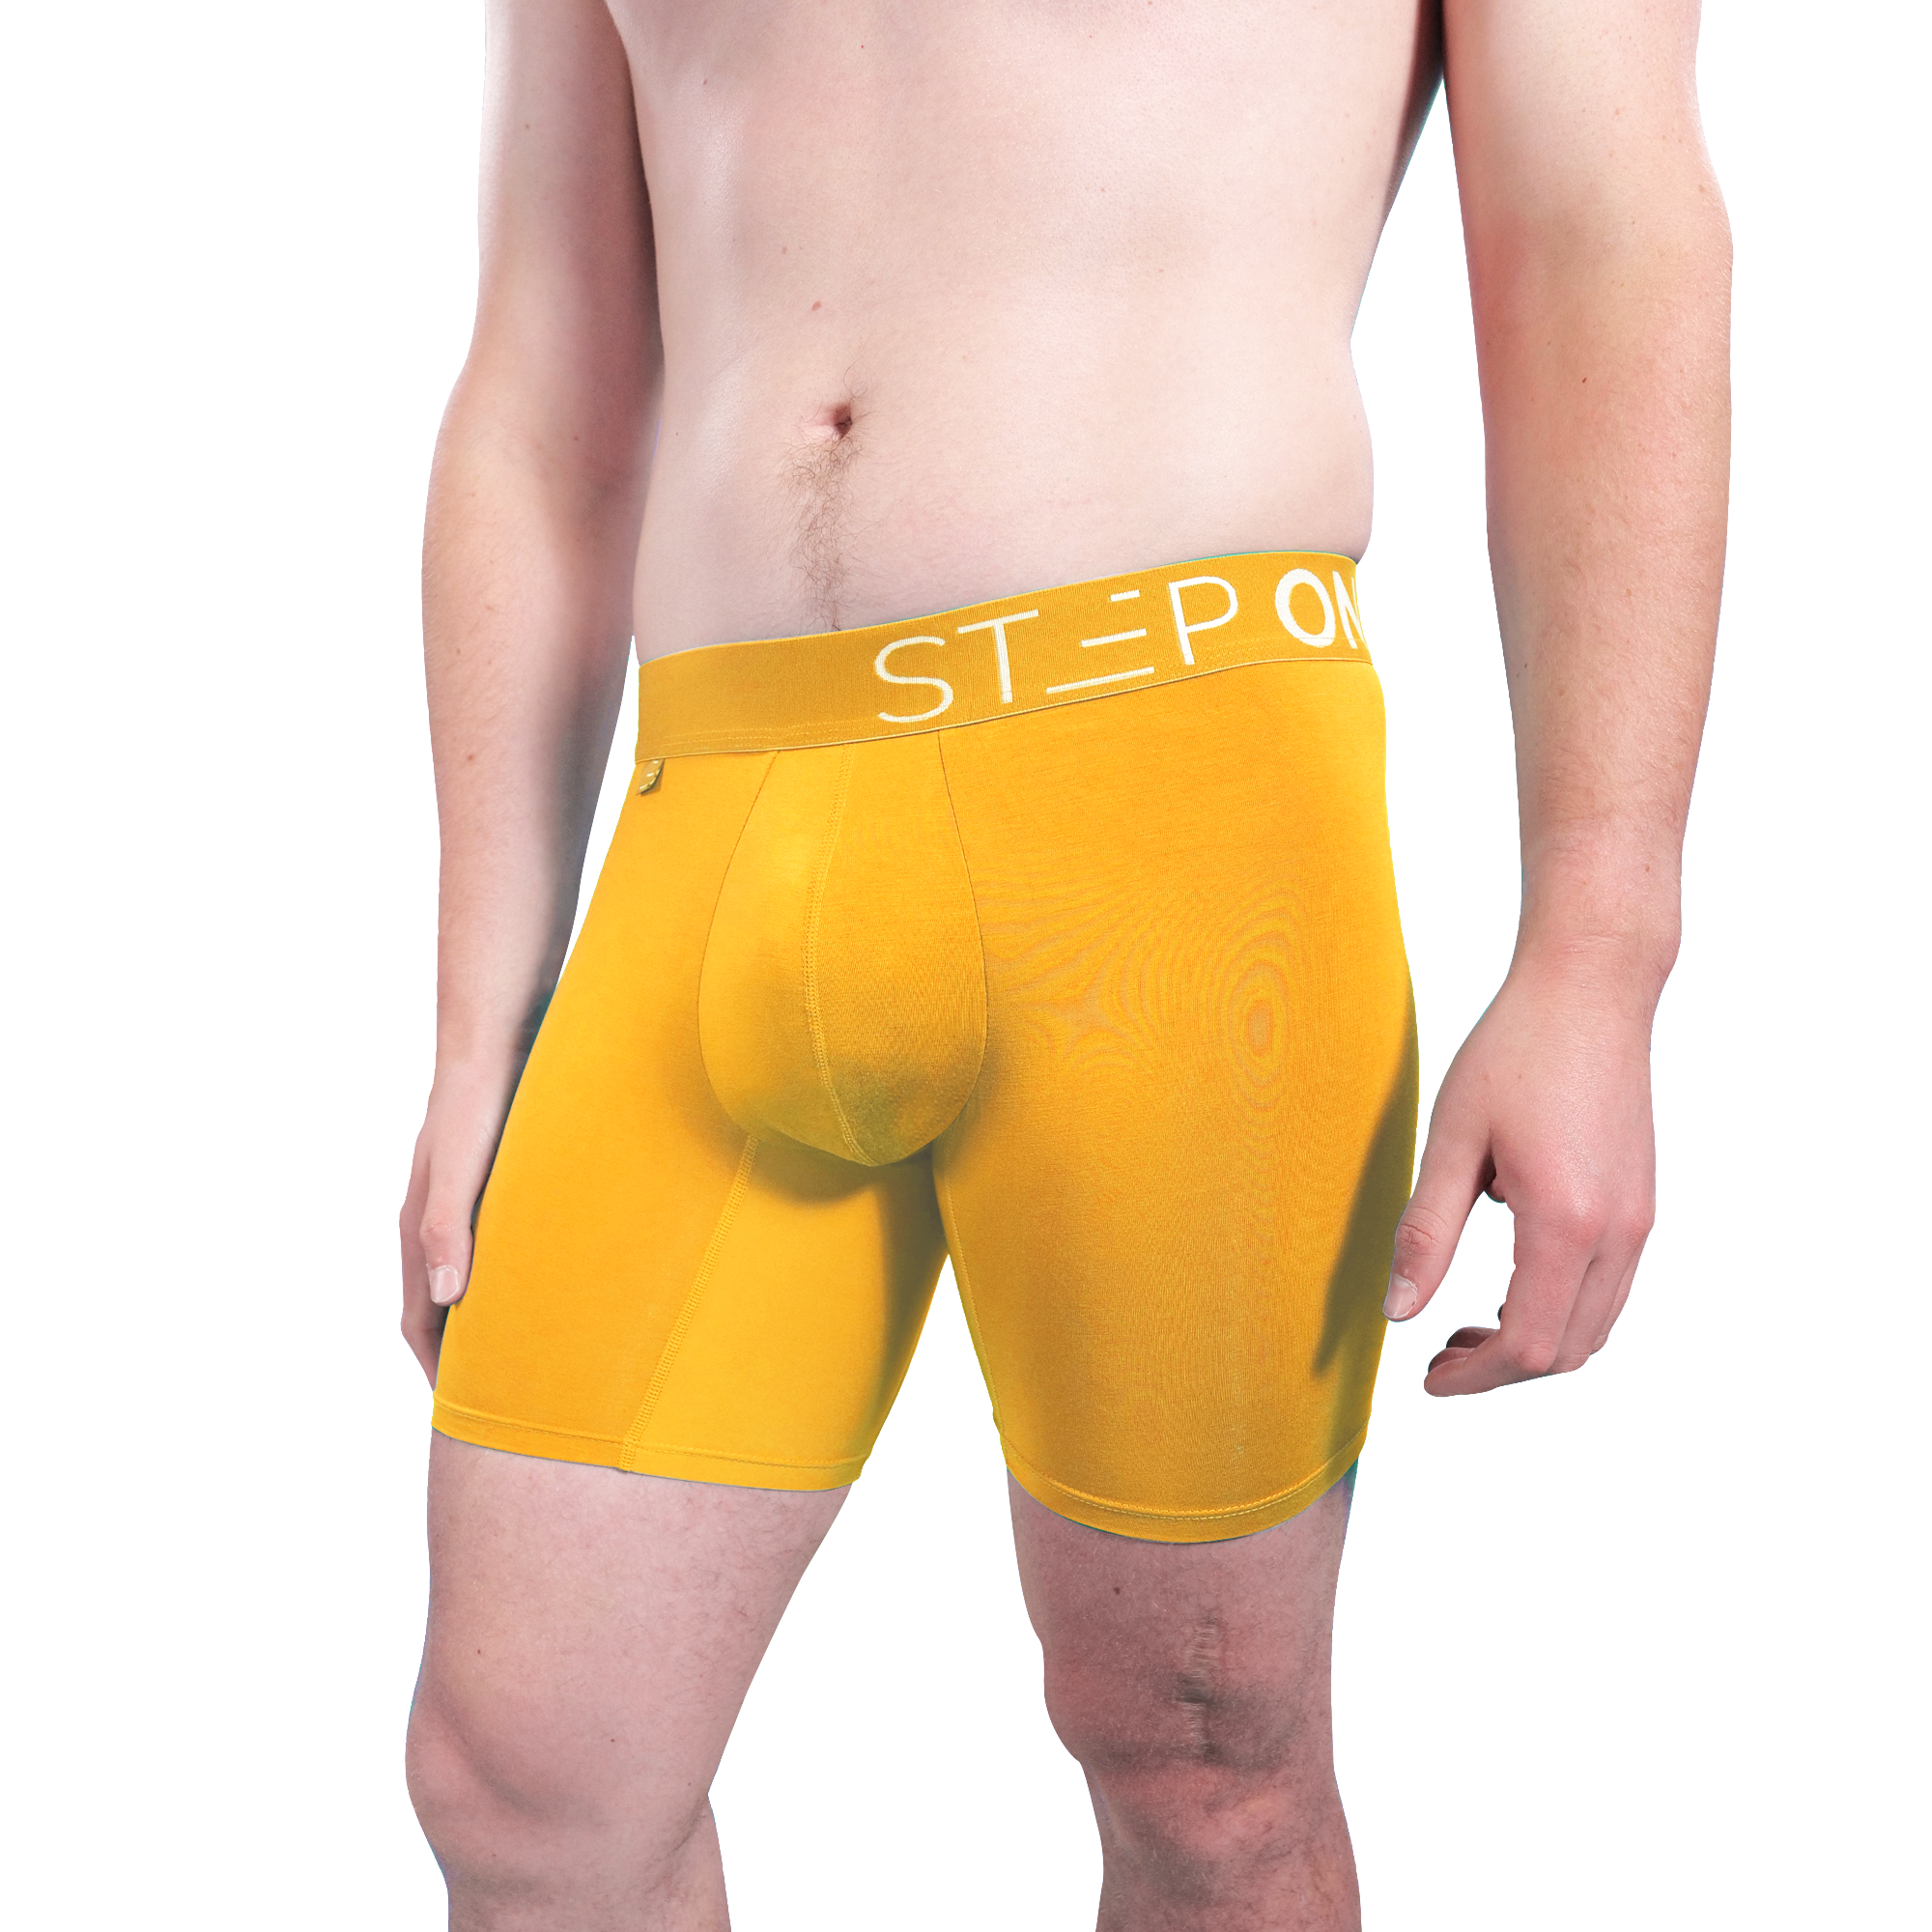 4 Pack Sexy Seeinner Step One Mens Underpants For Men With Large